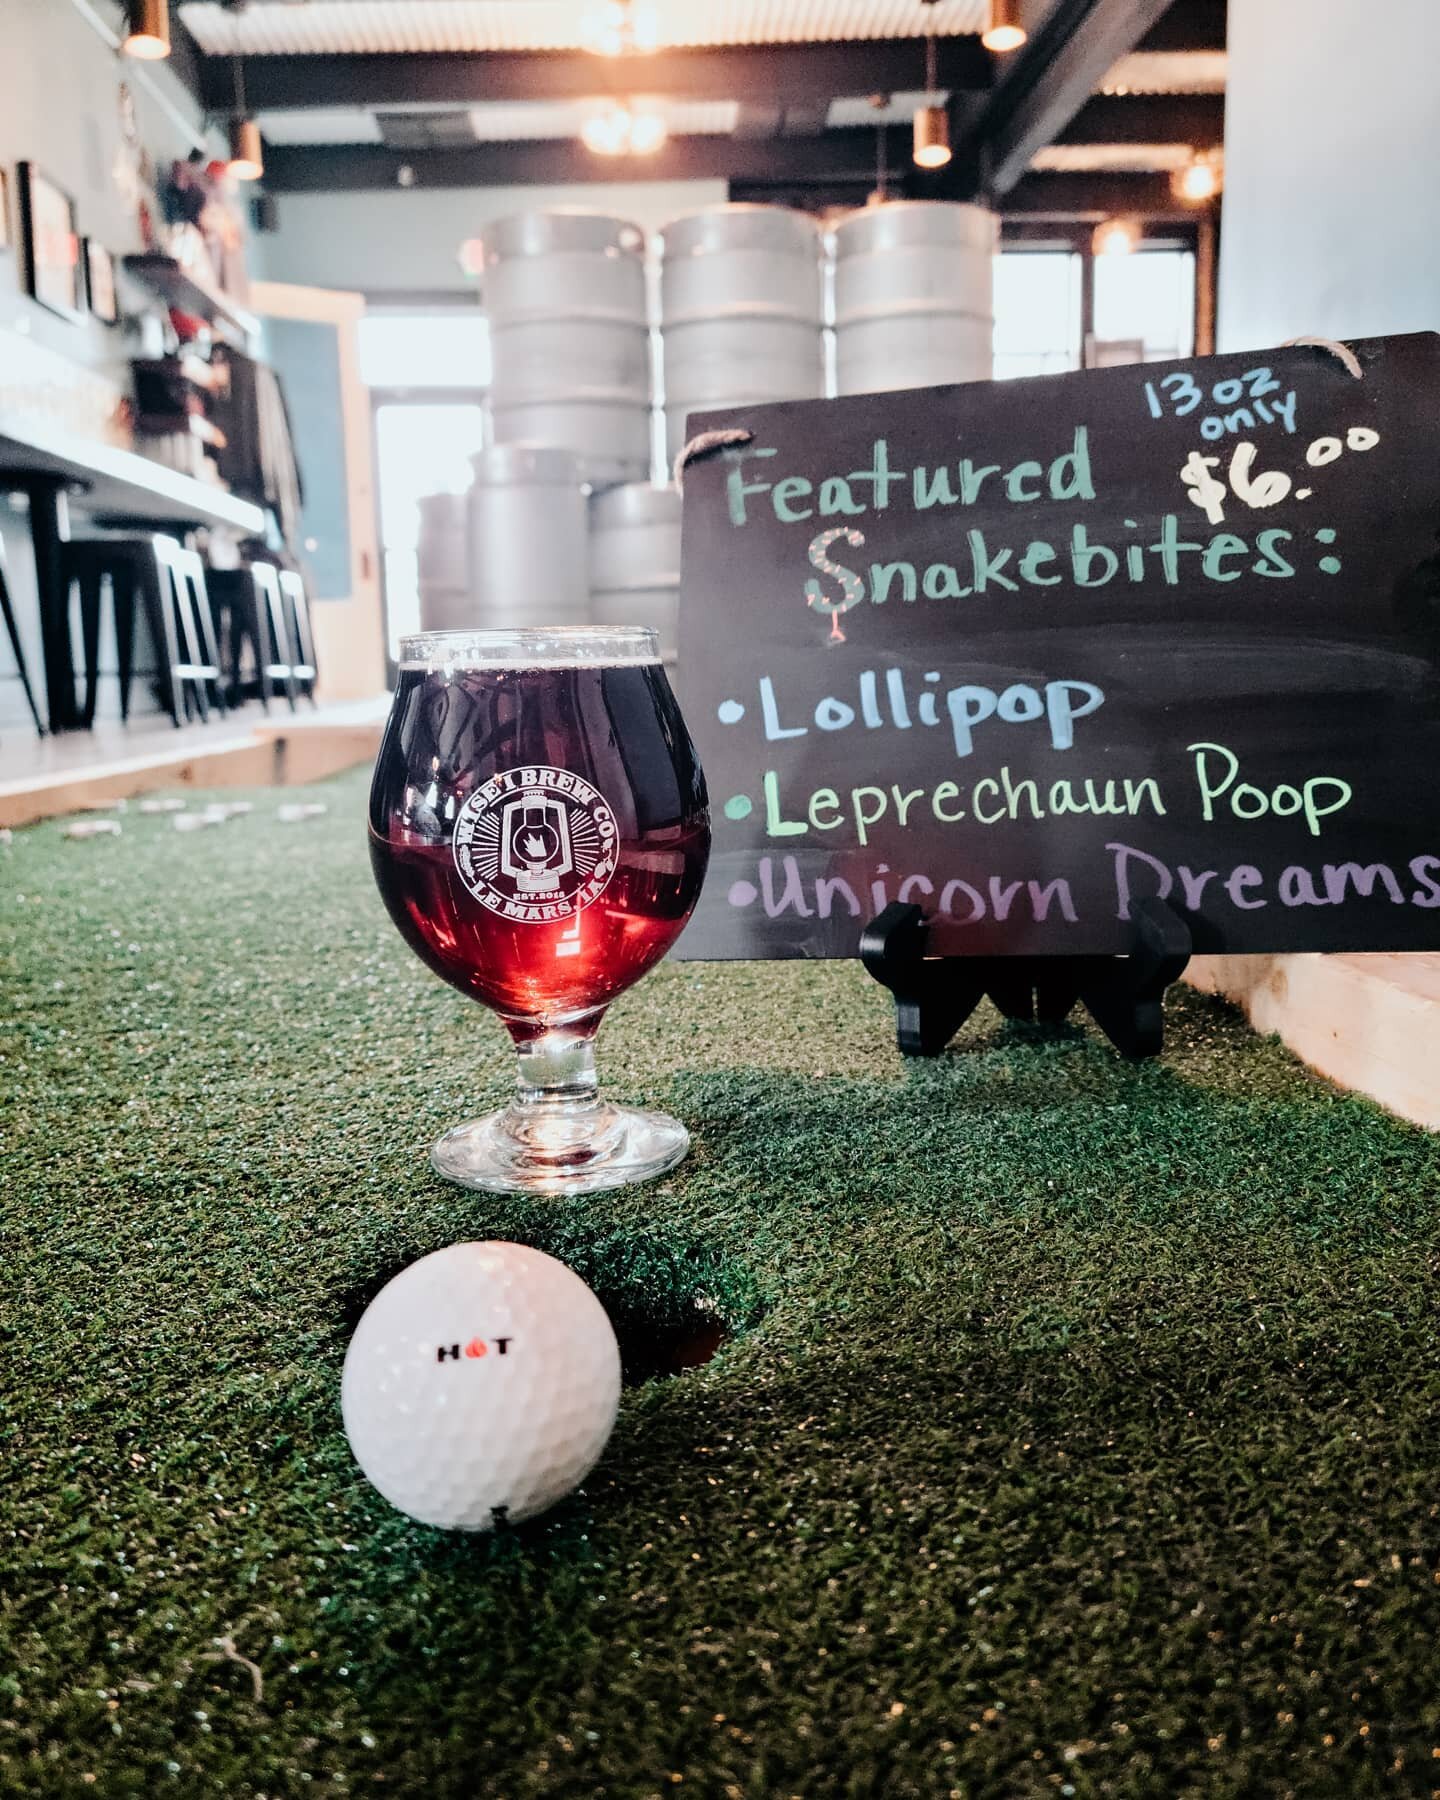 We have a secret...

A TOP SECRET Sour! Come in tonight and give it a try and tell us what flavor you think it is.

And try out our new Featured Snakebites while you play a hole on our mini Putt Putt while we still have it out.

Taproom opens at 3pm!